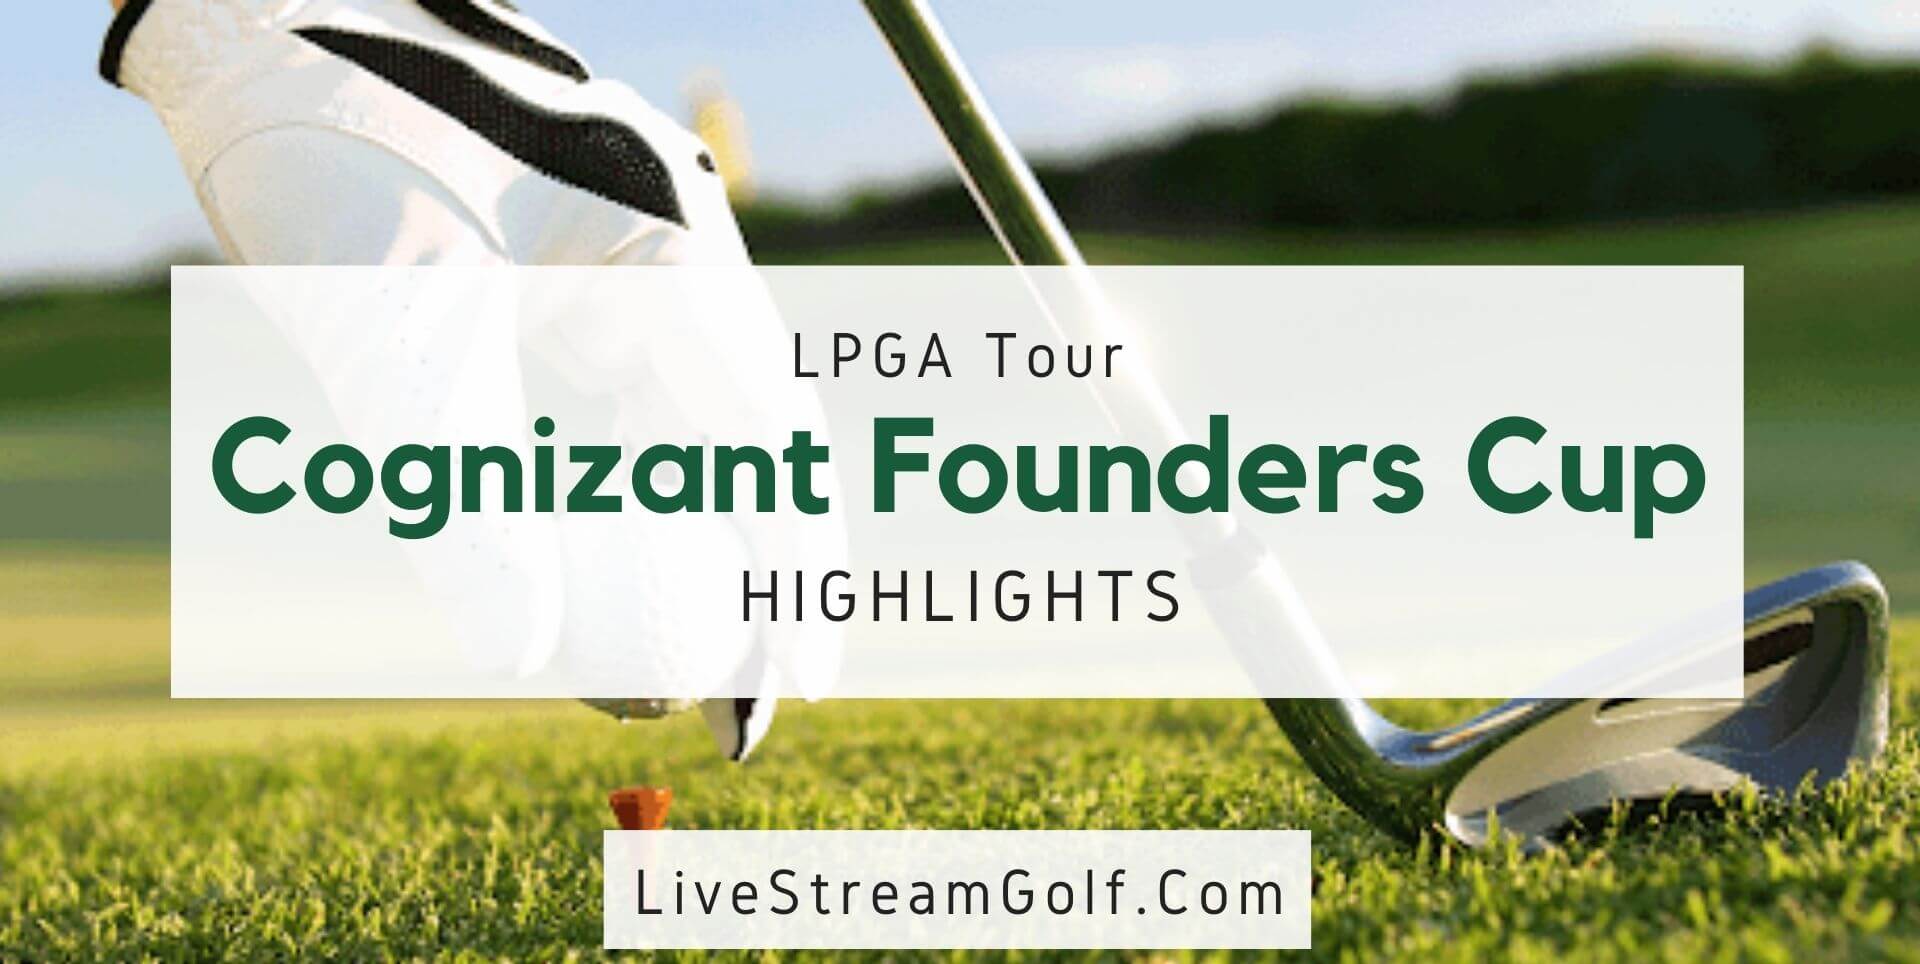 Cognizant Founders Cup Rd 1 Highlights LPGA 2021